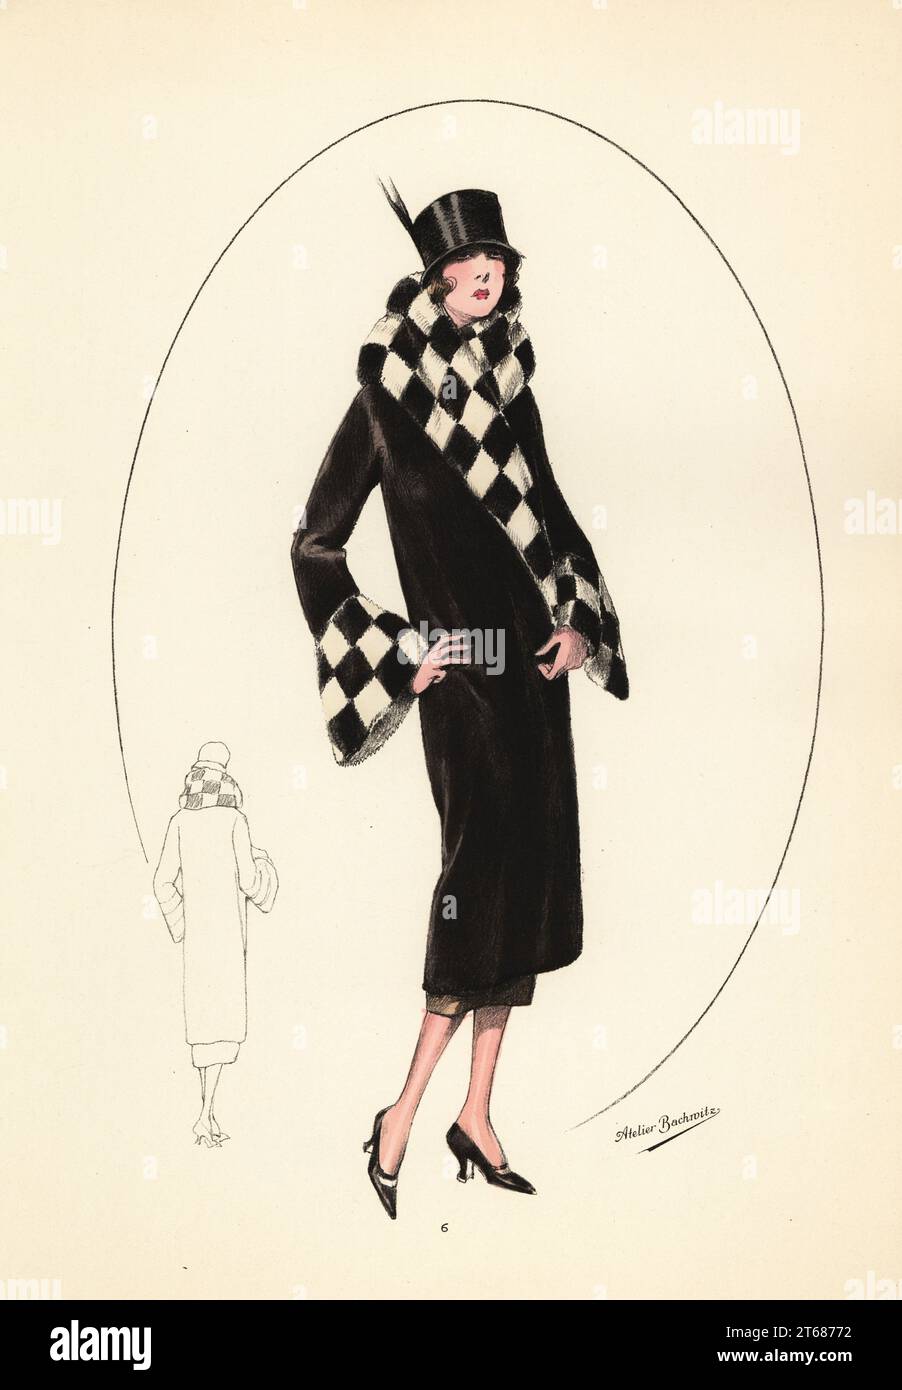 Fashionable woman in short bob haircut, brimless top hat and otter-skin coat, 1926. The coat with fronts in surplice effect, collar and cuffs in checkerboard of otter and ermine squares. Manteau en loutre. Handcoloured lithograph from Modeles Originaux de Fourrures, Original Models in Fur, No. 17, Atelier Bachwitz, Vienna, 1926. Stock Photo